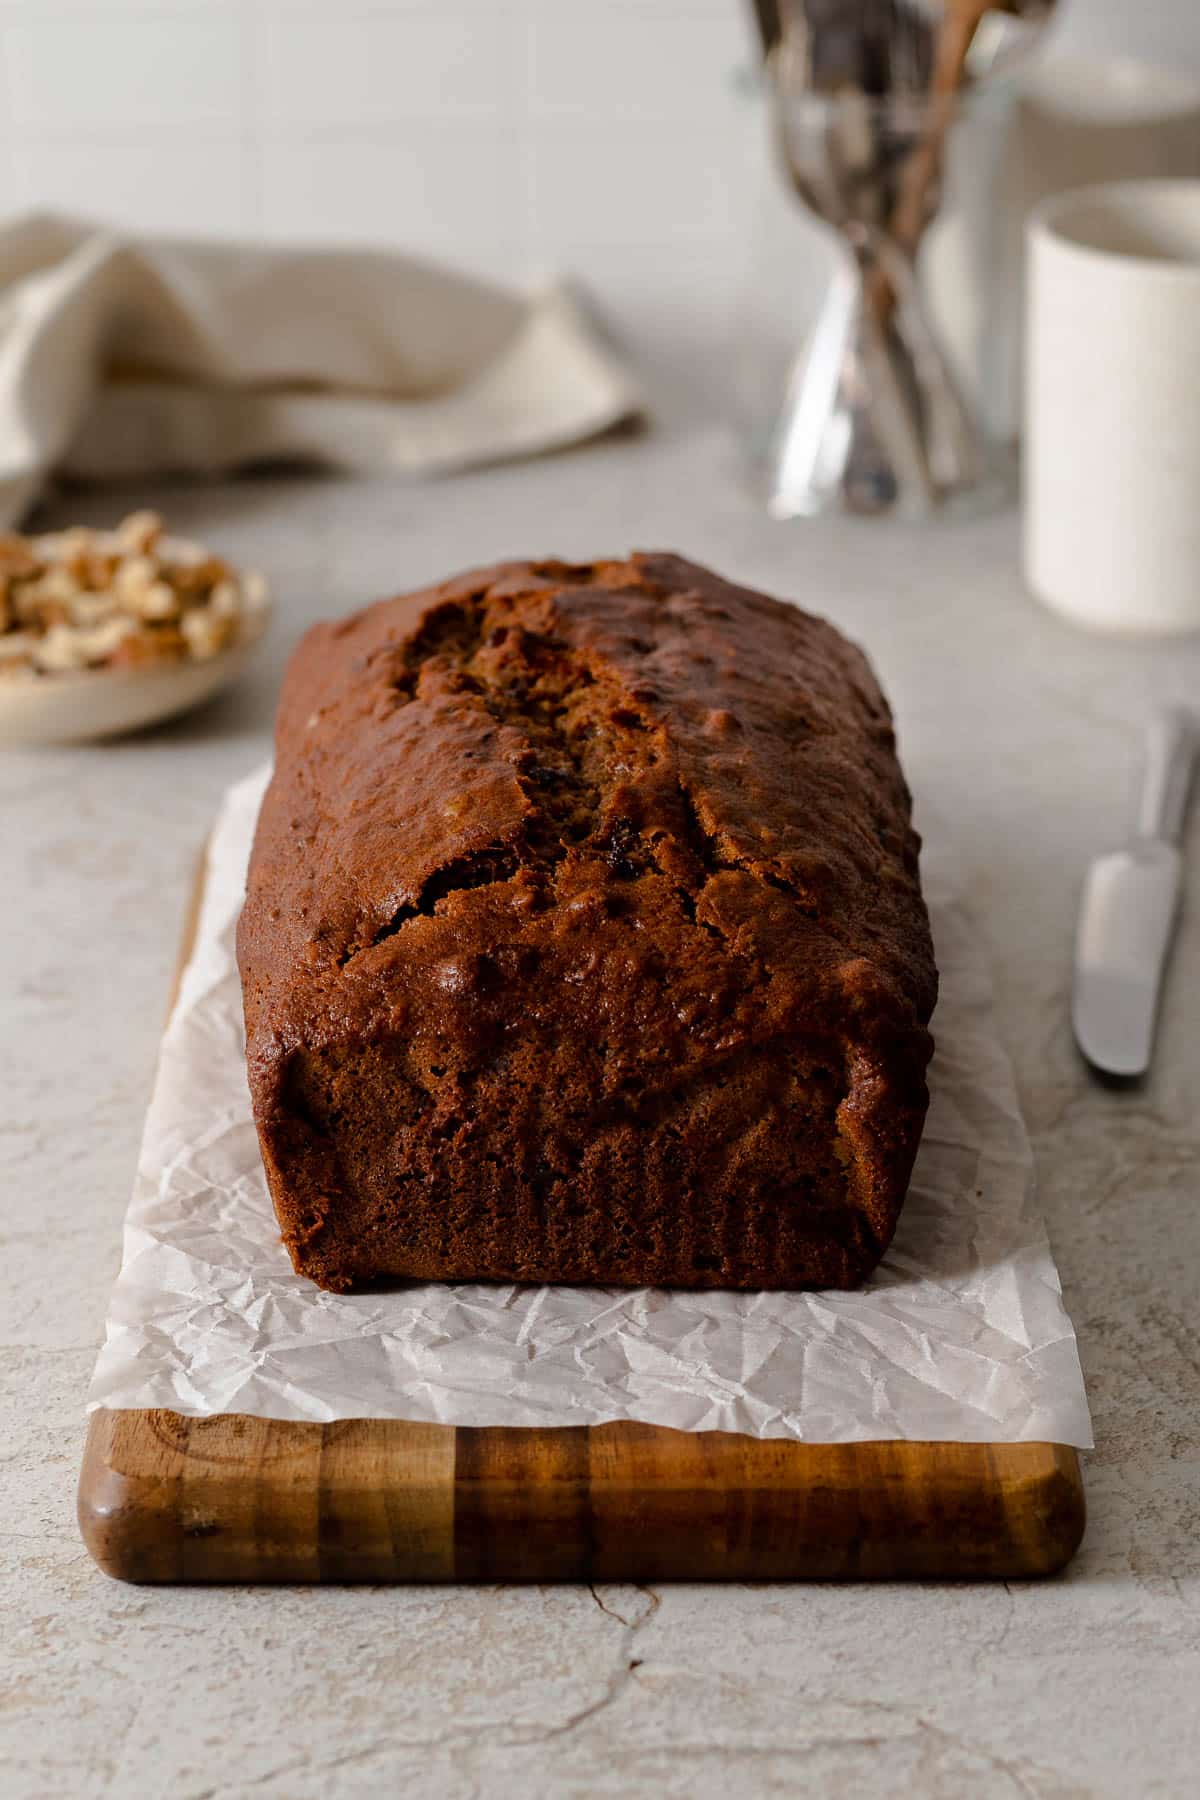 Spiced date and walnut loaf cake on a serving board.